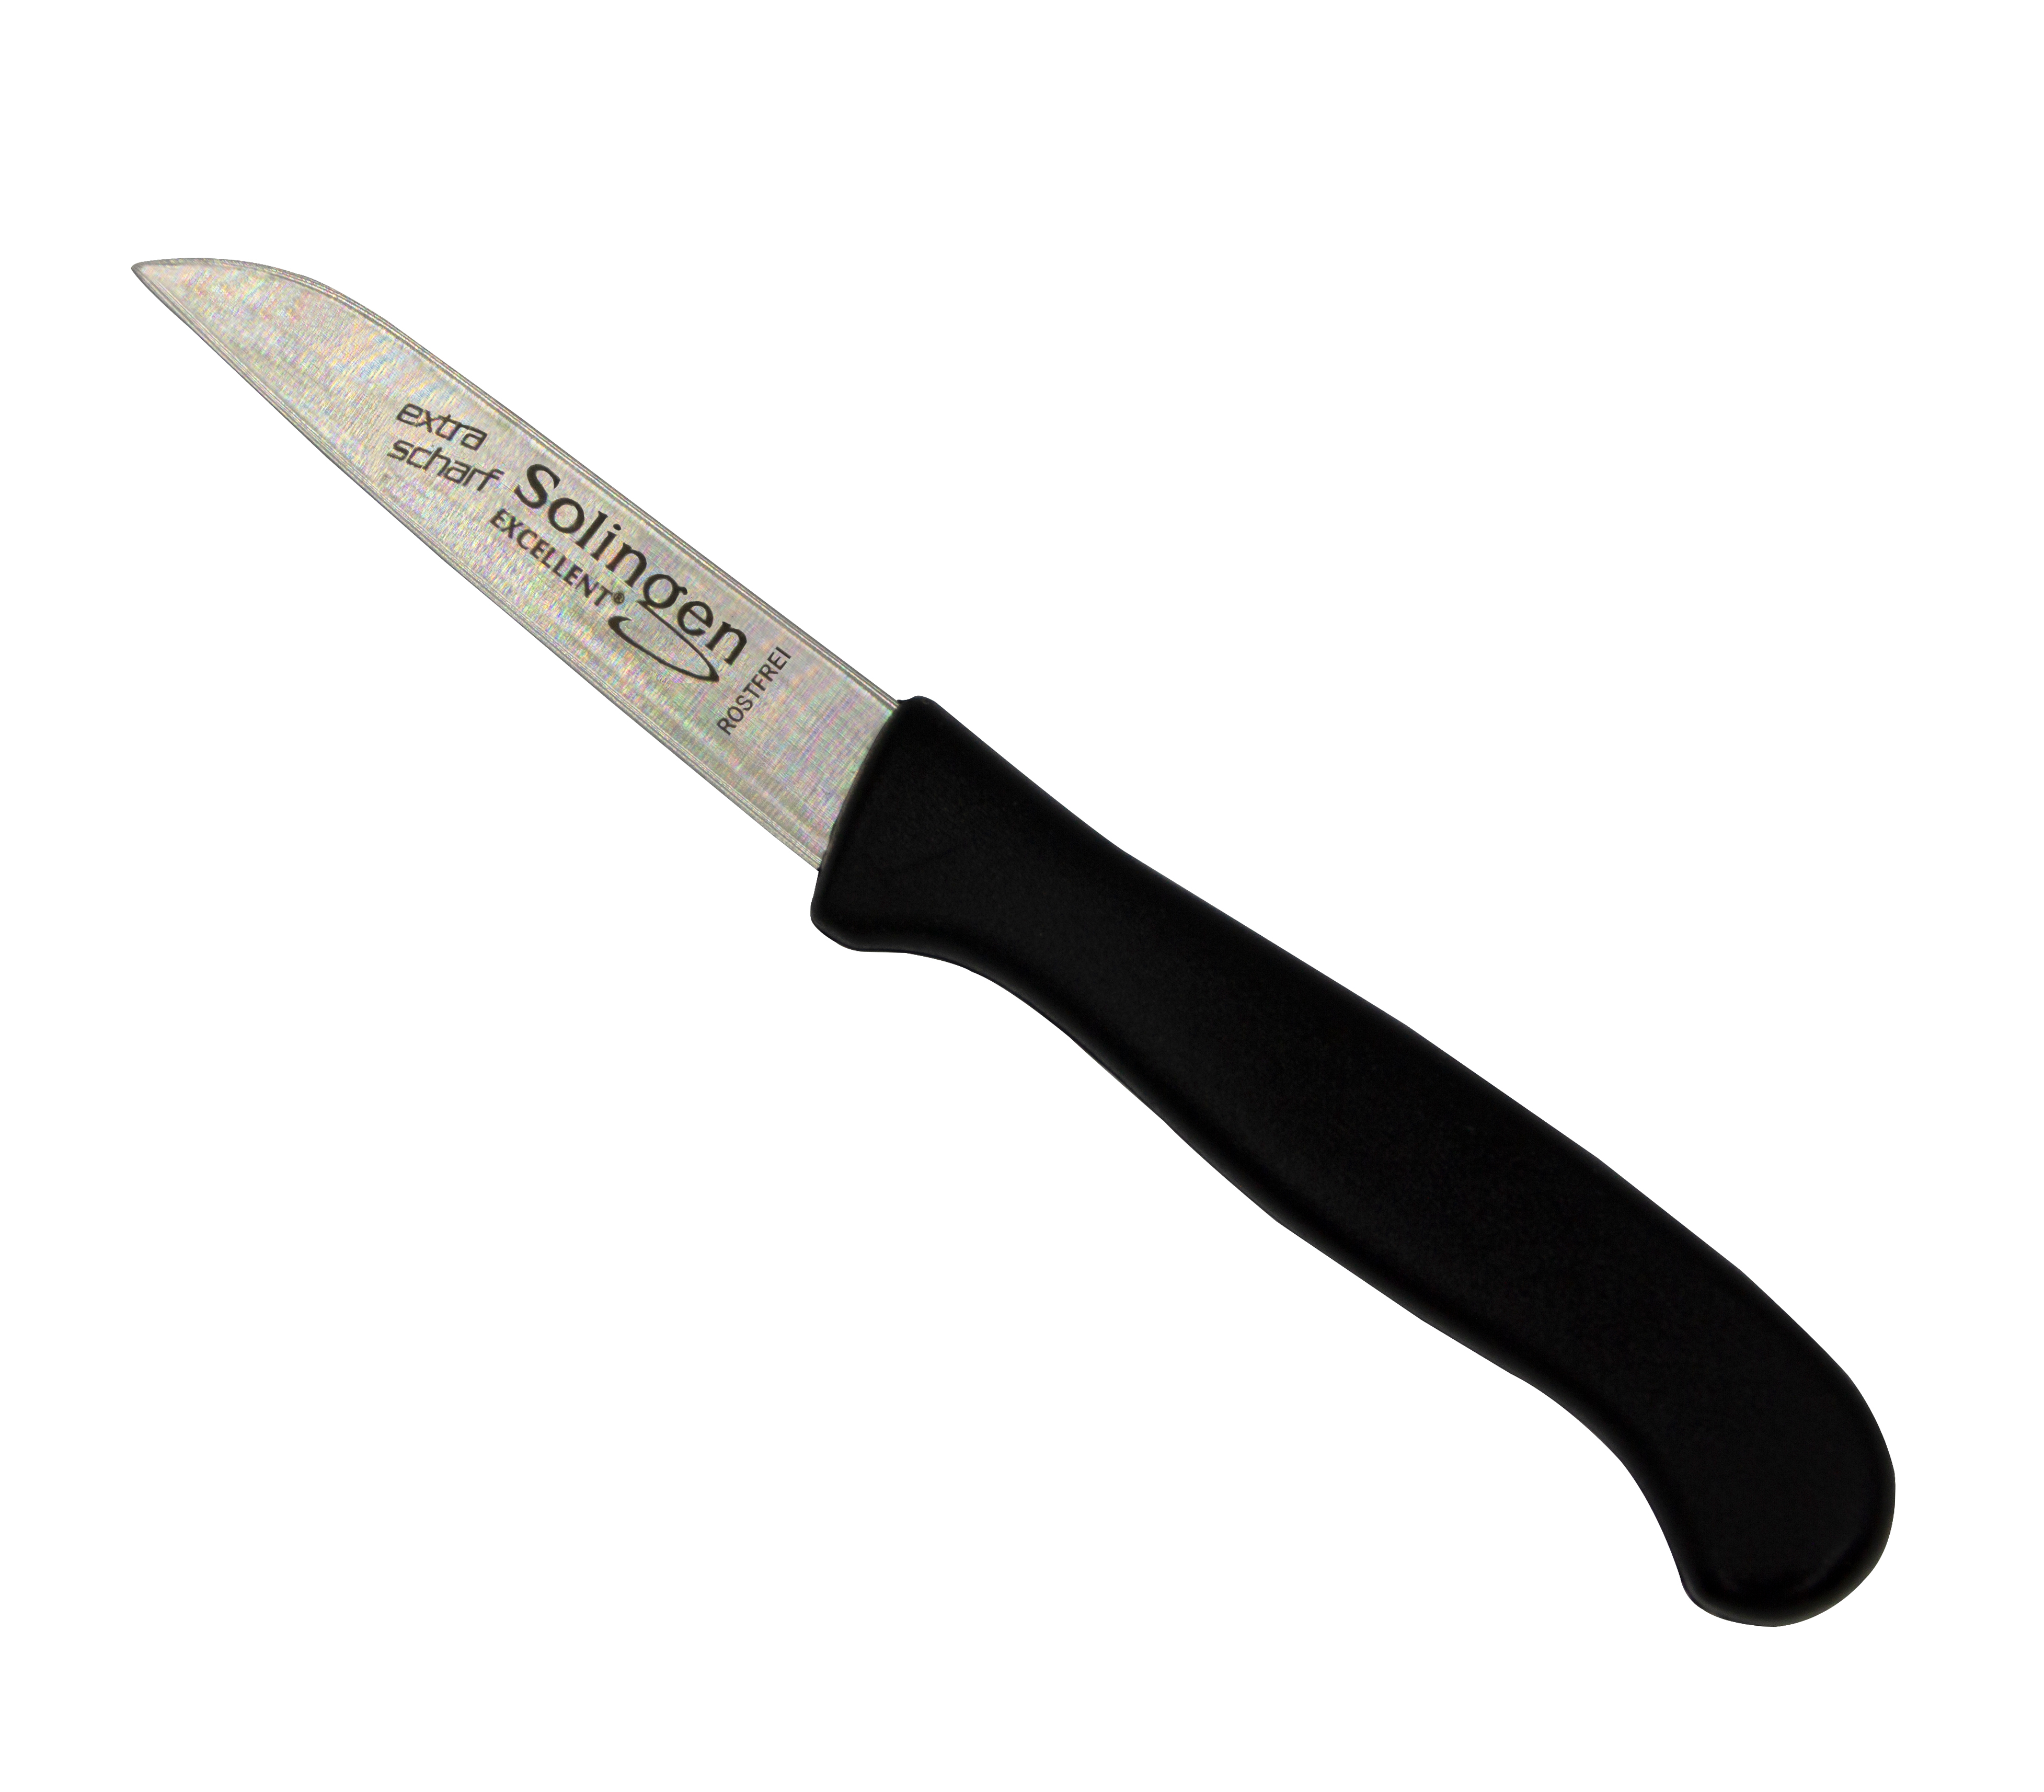 Excellent kitchen knife 6 cm with plastic handle